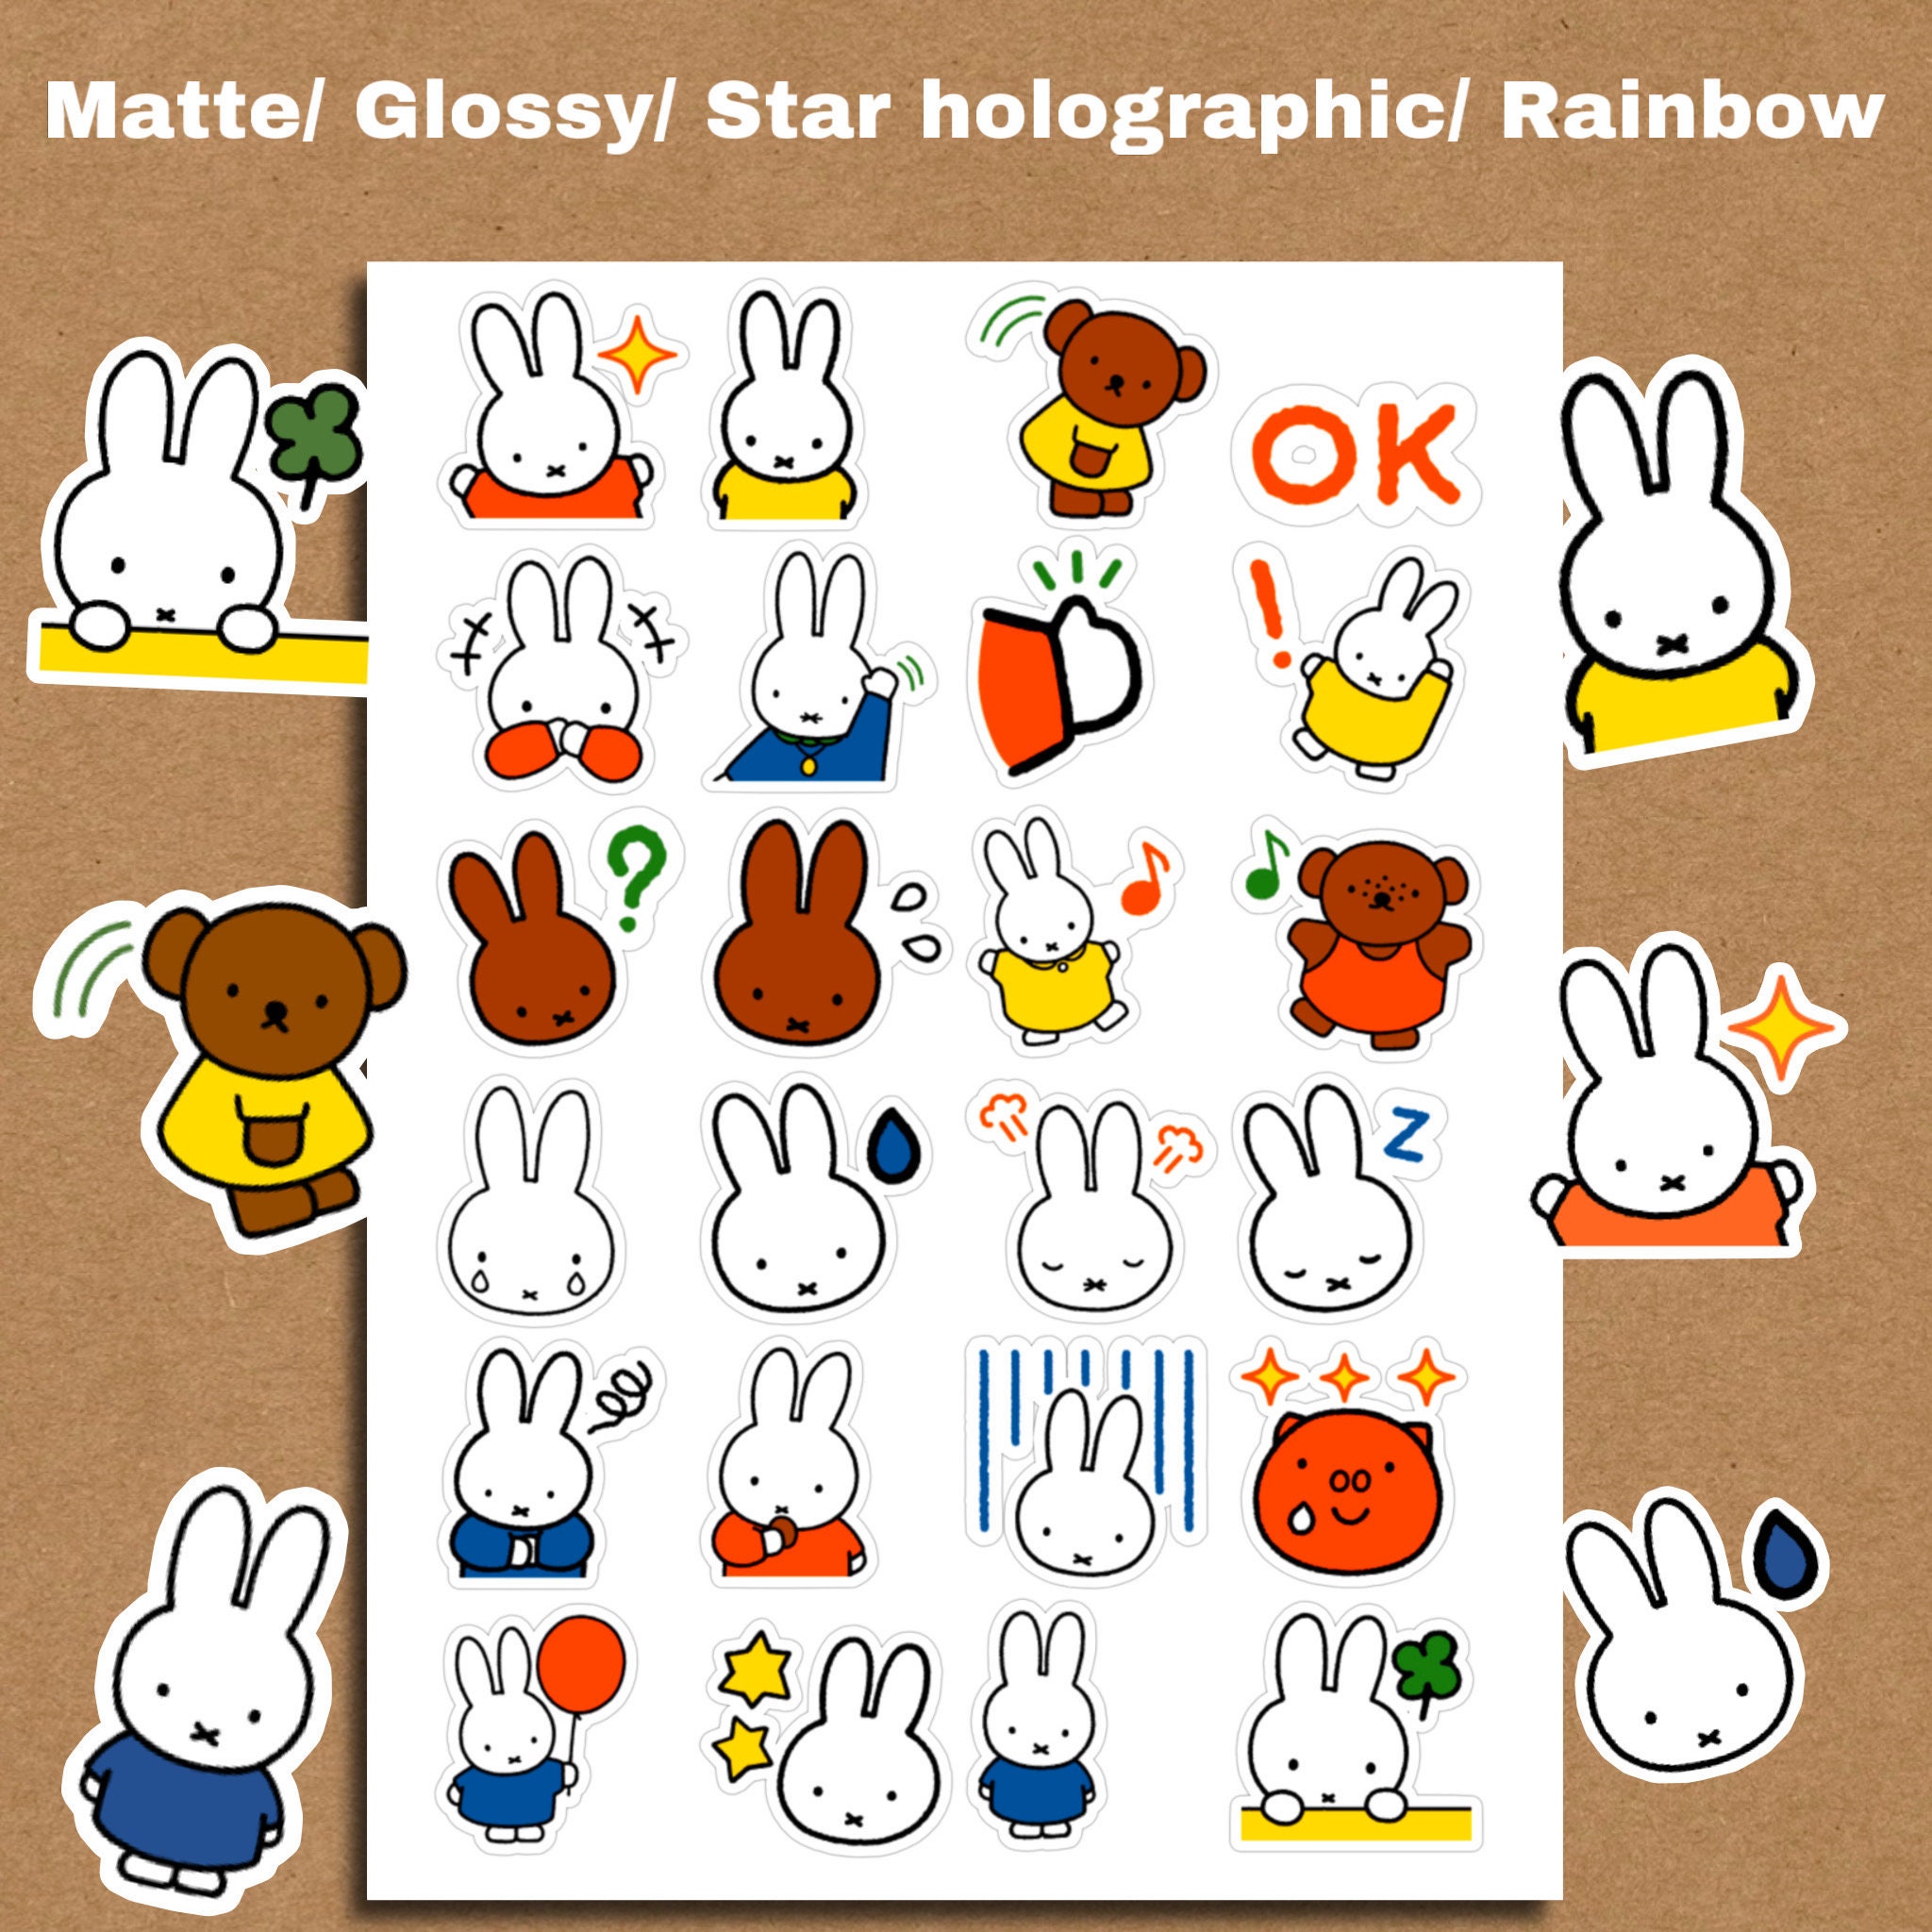 Miffy on X: Did you know you can now download Miffy iMessage